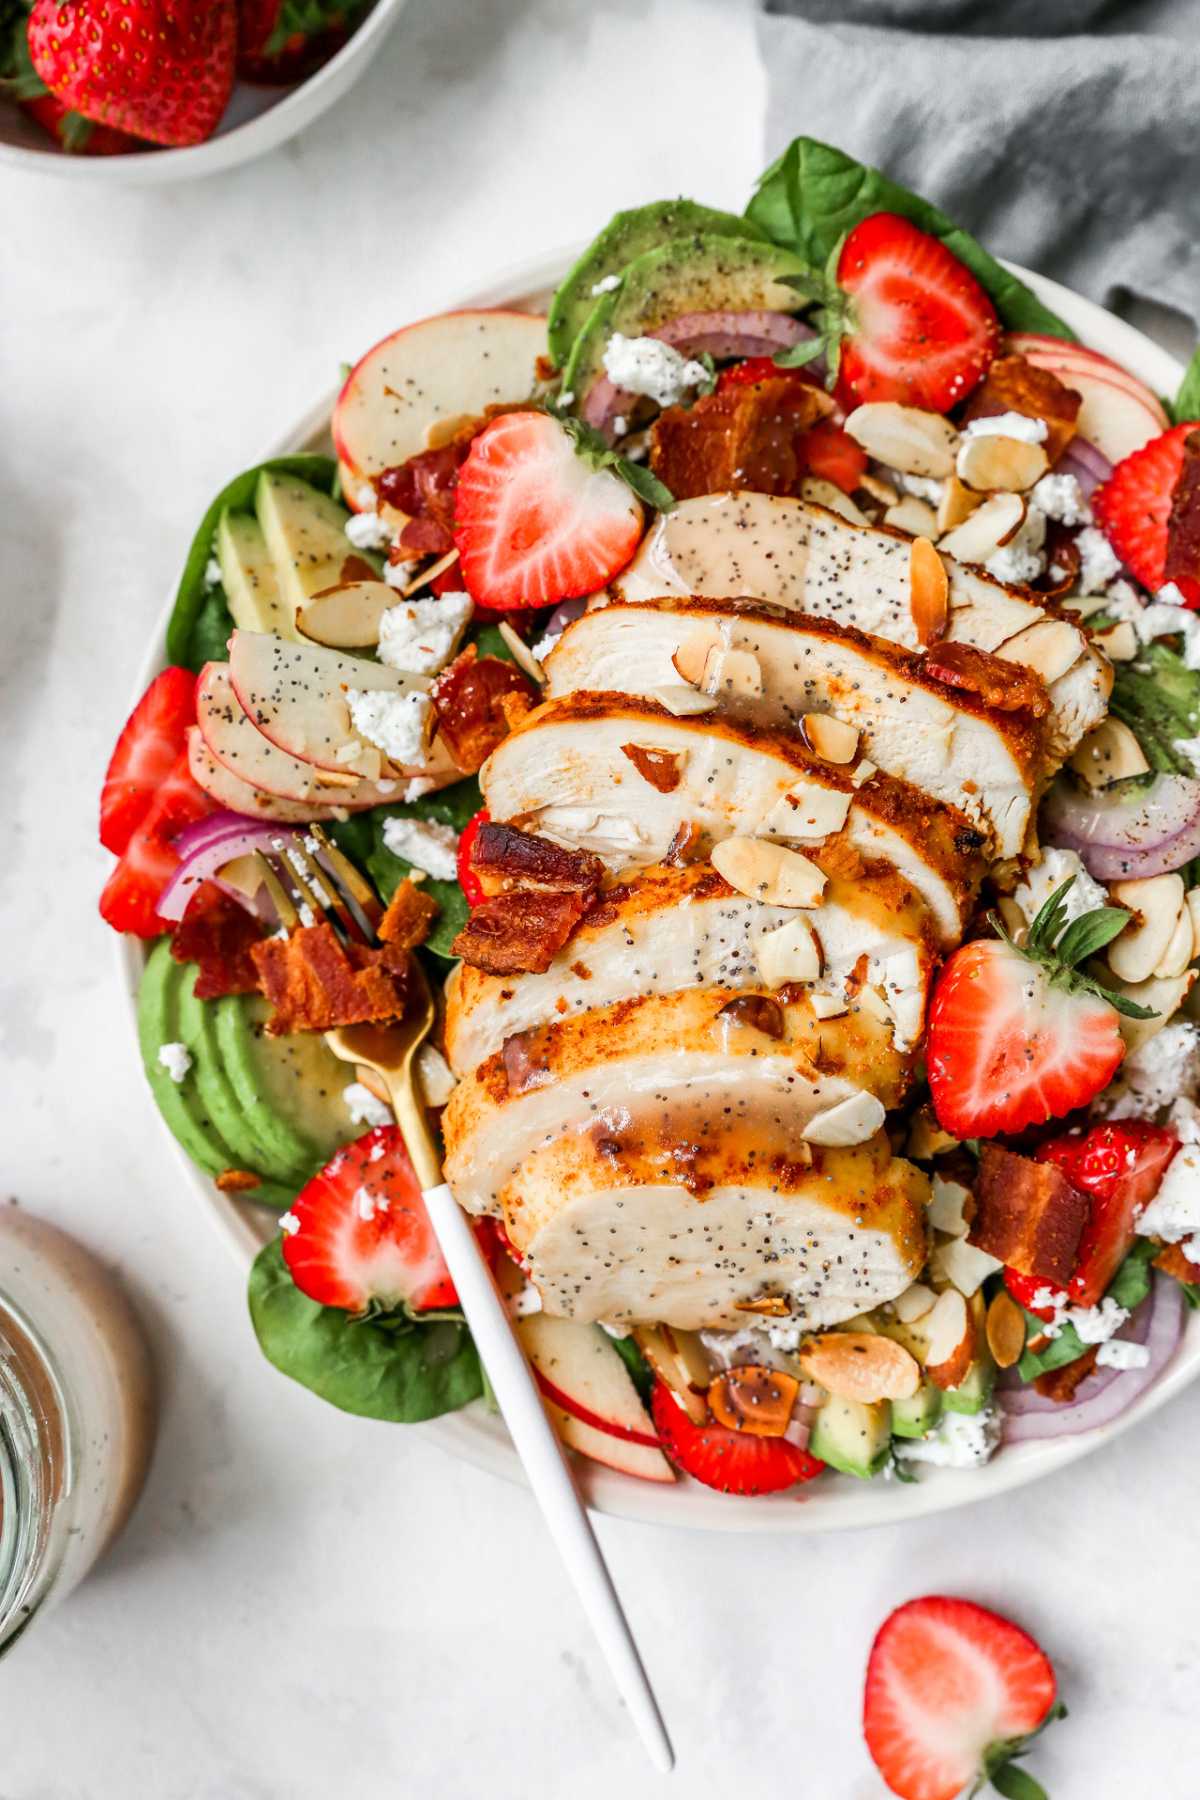 Spinach salad topped with strawberries and chicken.